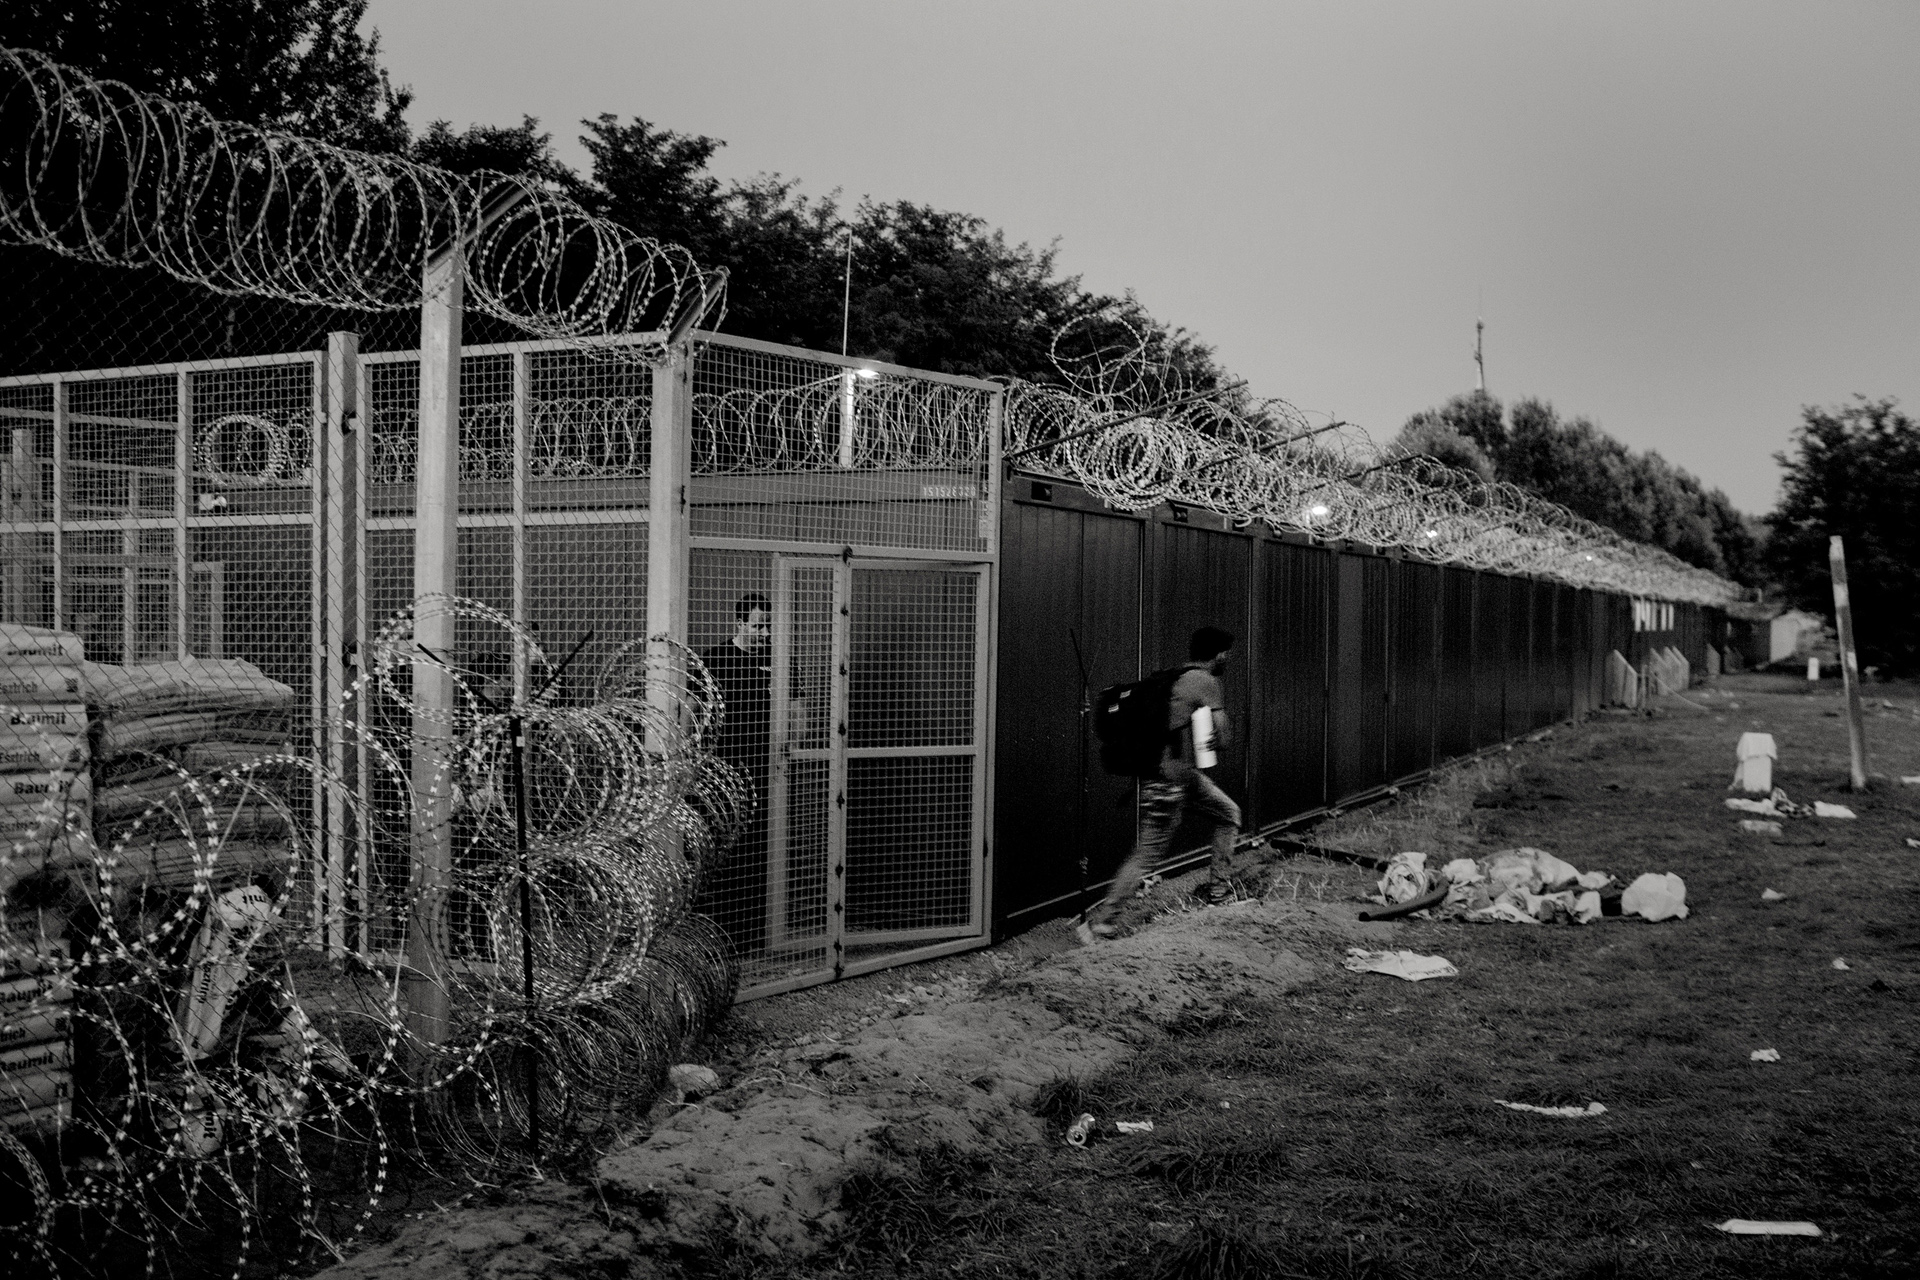 15 September 2015, Horgos, Serbia. Horgos-Roeszke border crossing.
A refugee rejected by Hungarian authorities leaves the so-called "transit zone" back into Serbia.
Hungarian authorities have installed fences on the common border with Serbia in to reestablish control on the migration movement. A tightening law passed by the right-wing Hungarian government took effect on midnight of 14-09-2015.